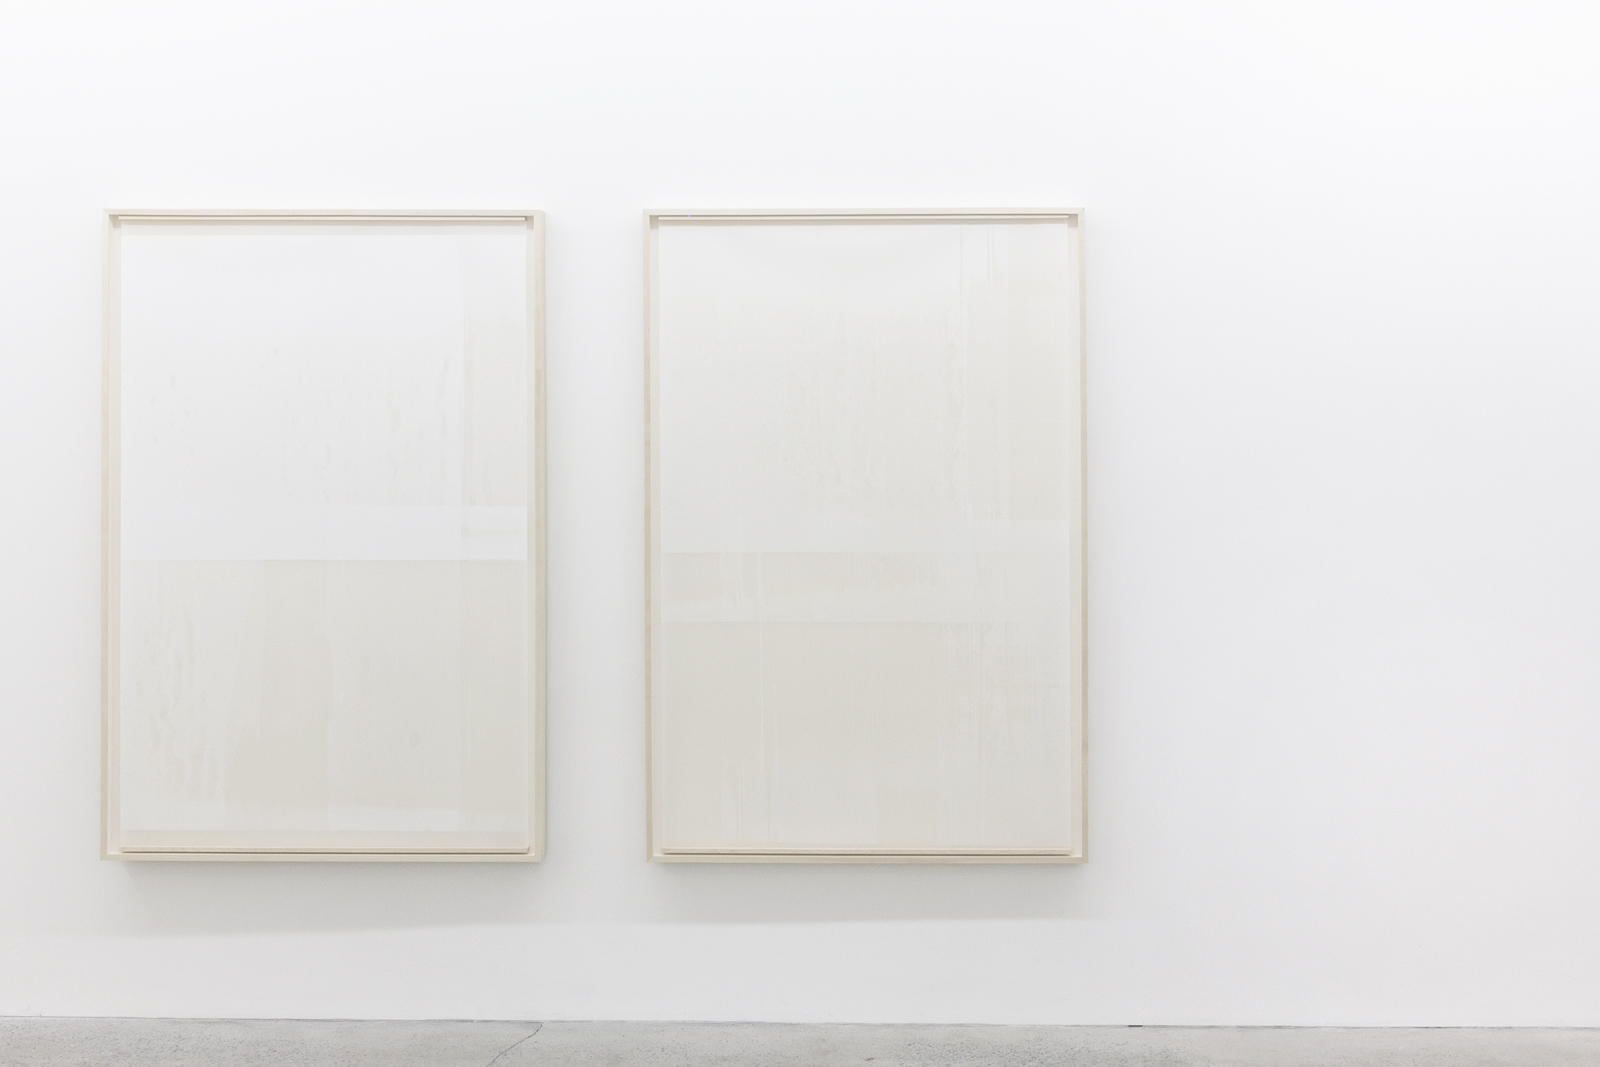   Untitled (from the series An Accurate Silence)  Oil based paint on frosted Mylar suspended in front of painted matte board, 2016 63 x 42 inches each 